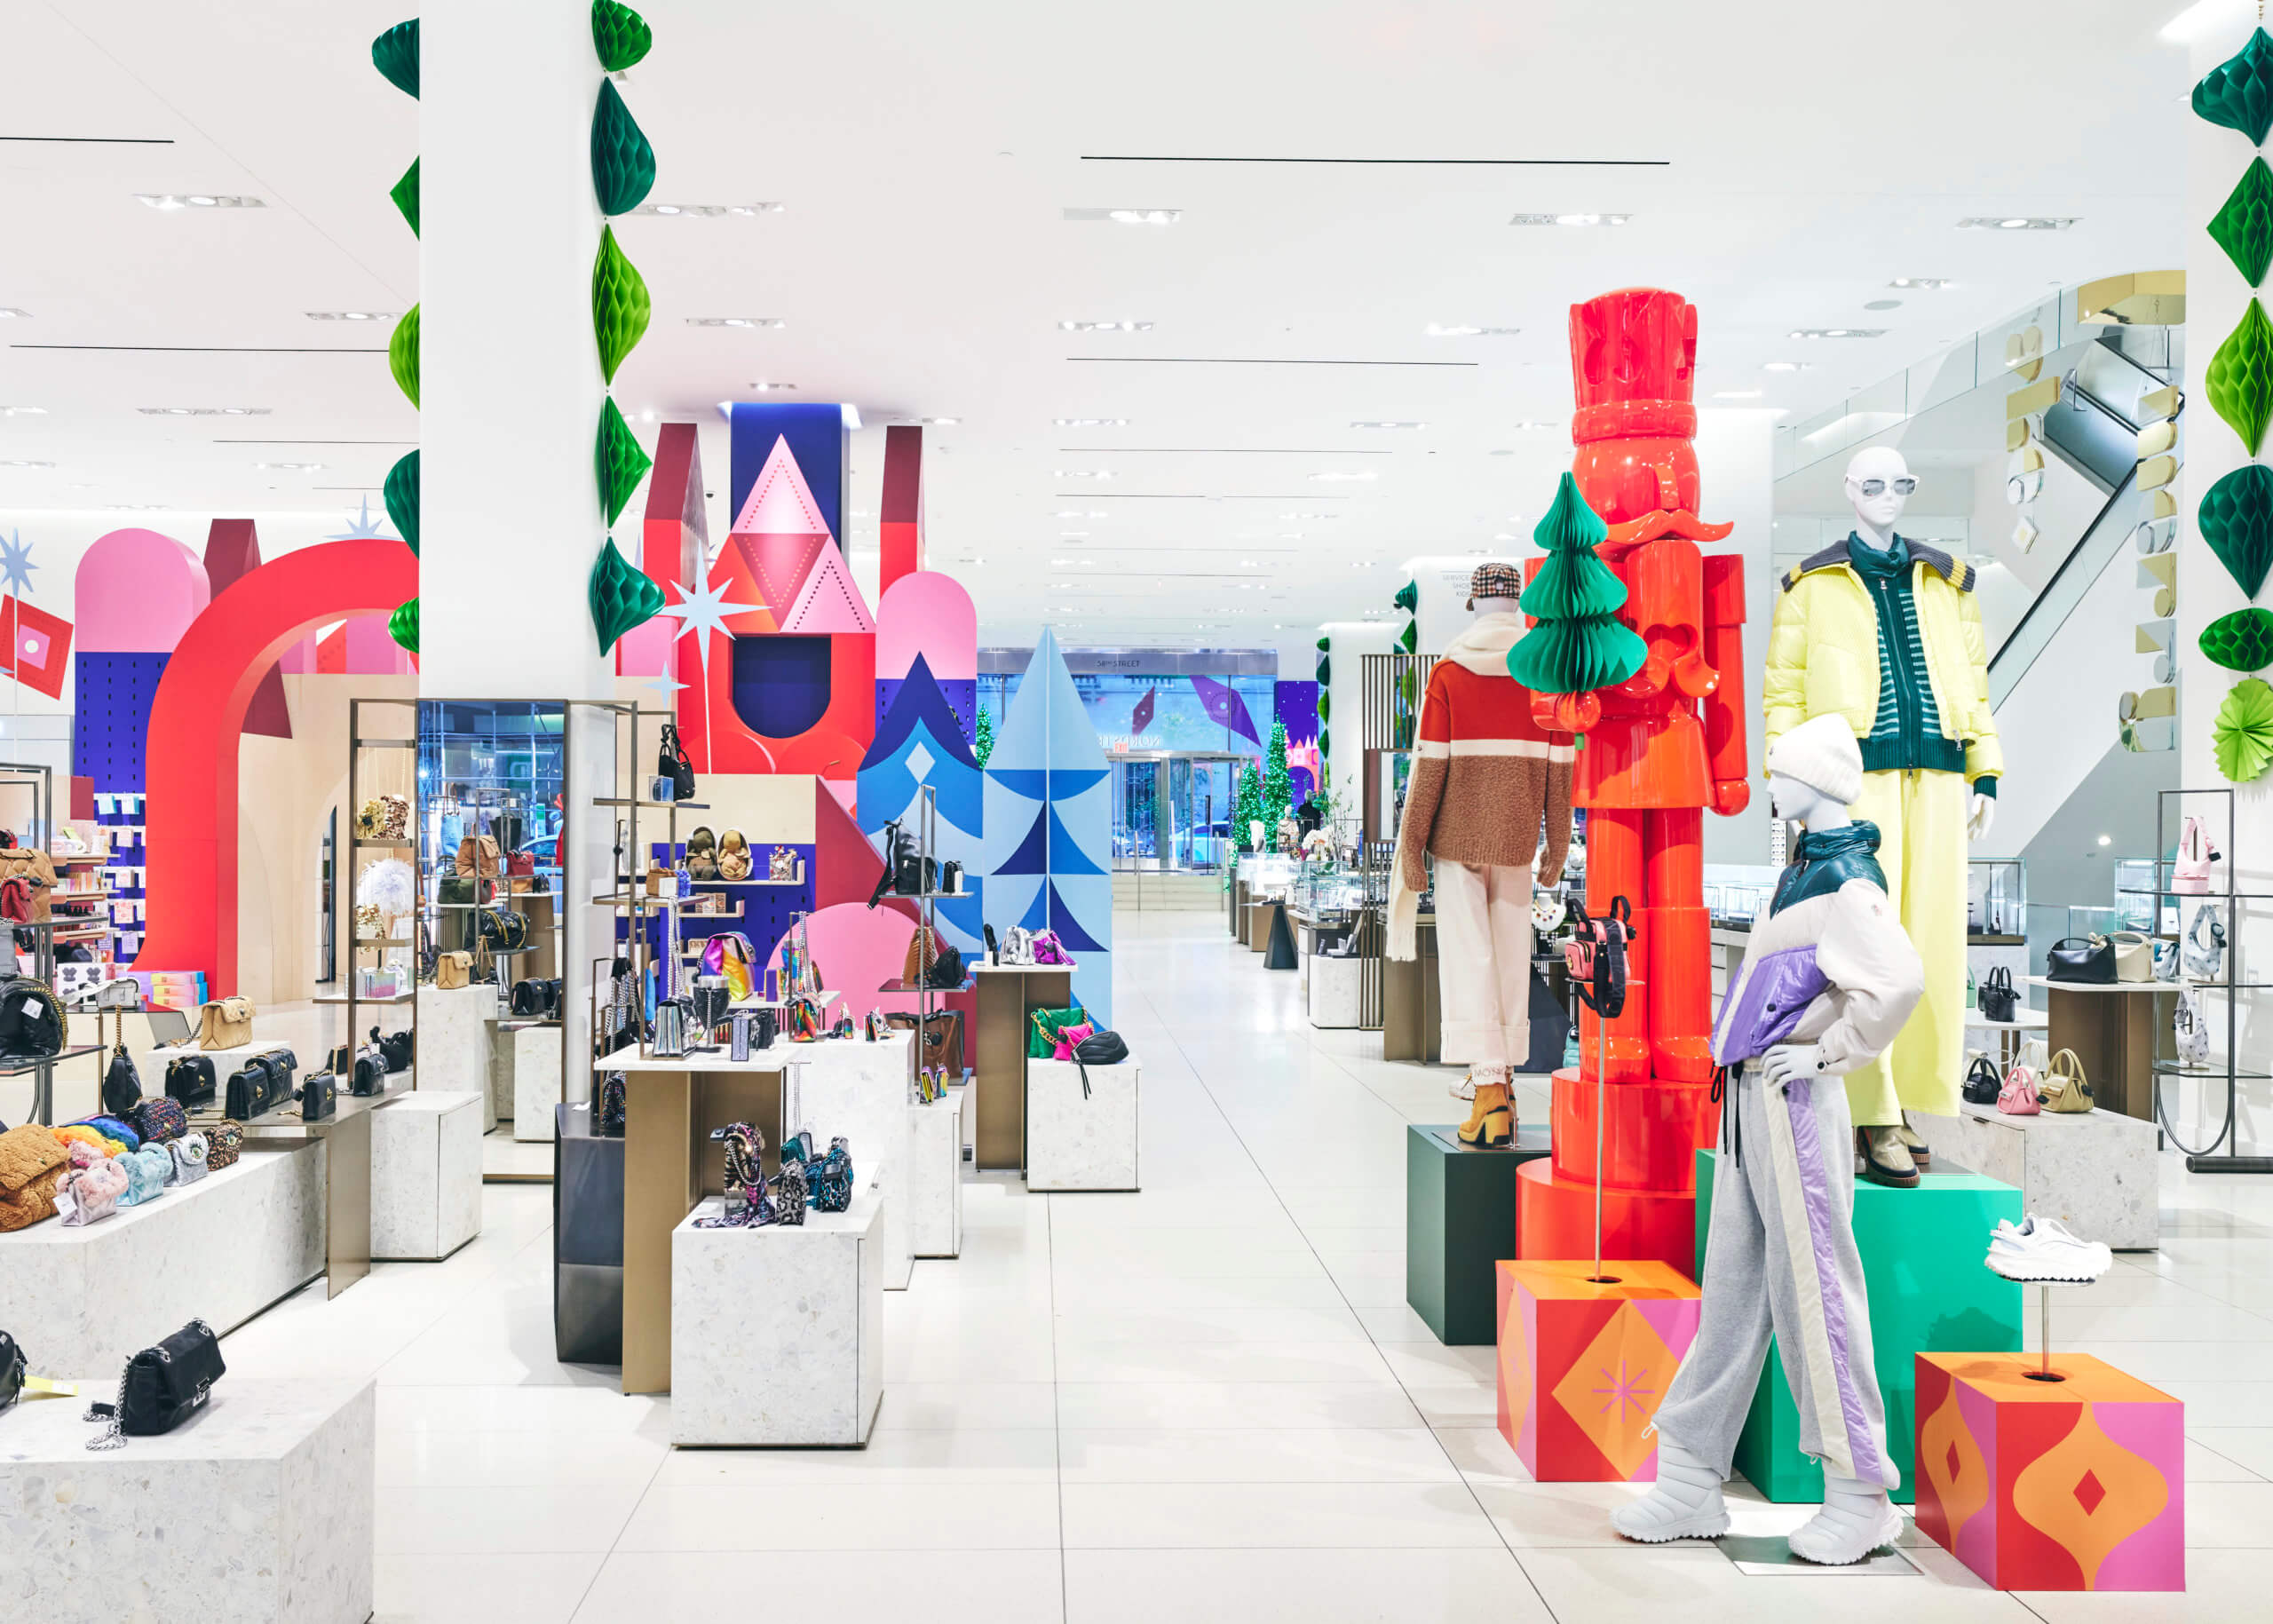 Nordstrom's New NYC Flagship Has Everything